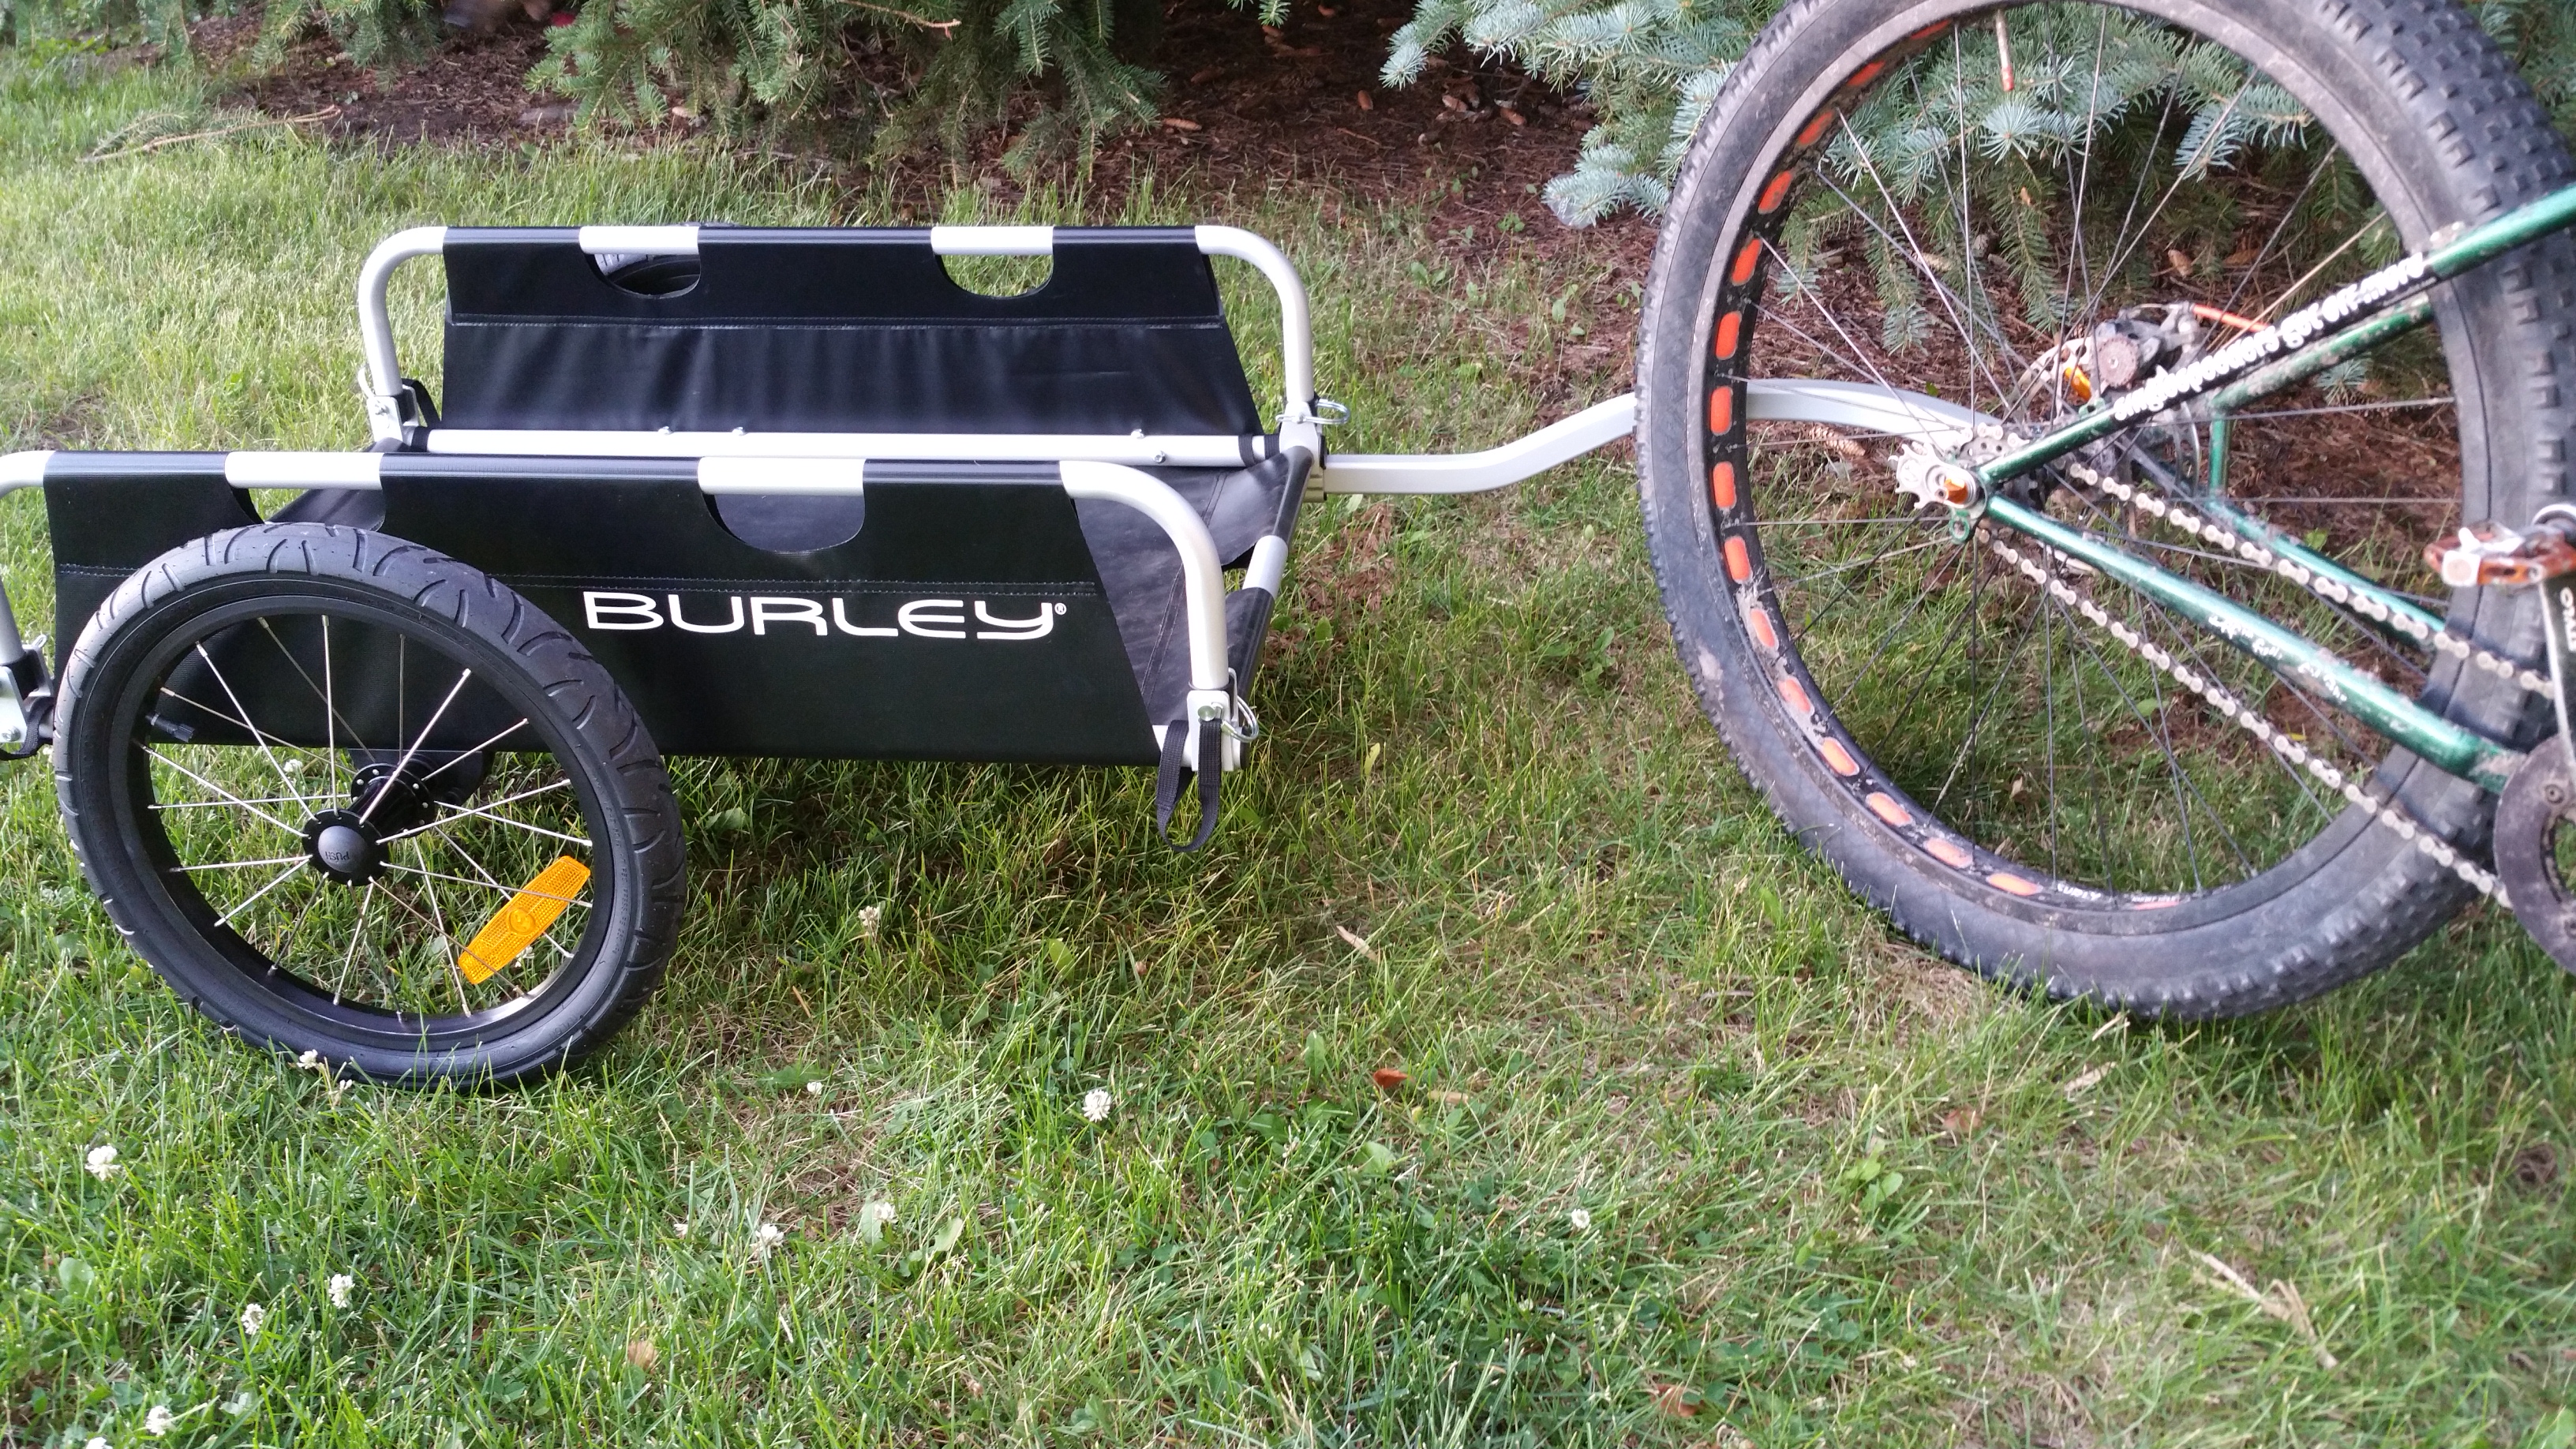 Burley Flatbed Bicycle Trailer, Carry Long Objects, Load Up to 99.3 lbs (45  kg), Unfolded Size: Length 33.0 inches (83.8 cm), Width 31.0 inches (78.5